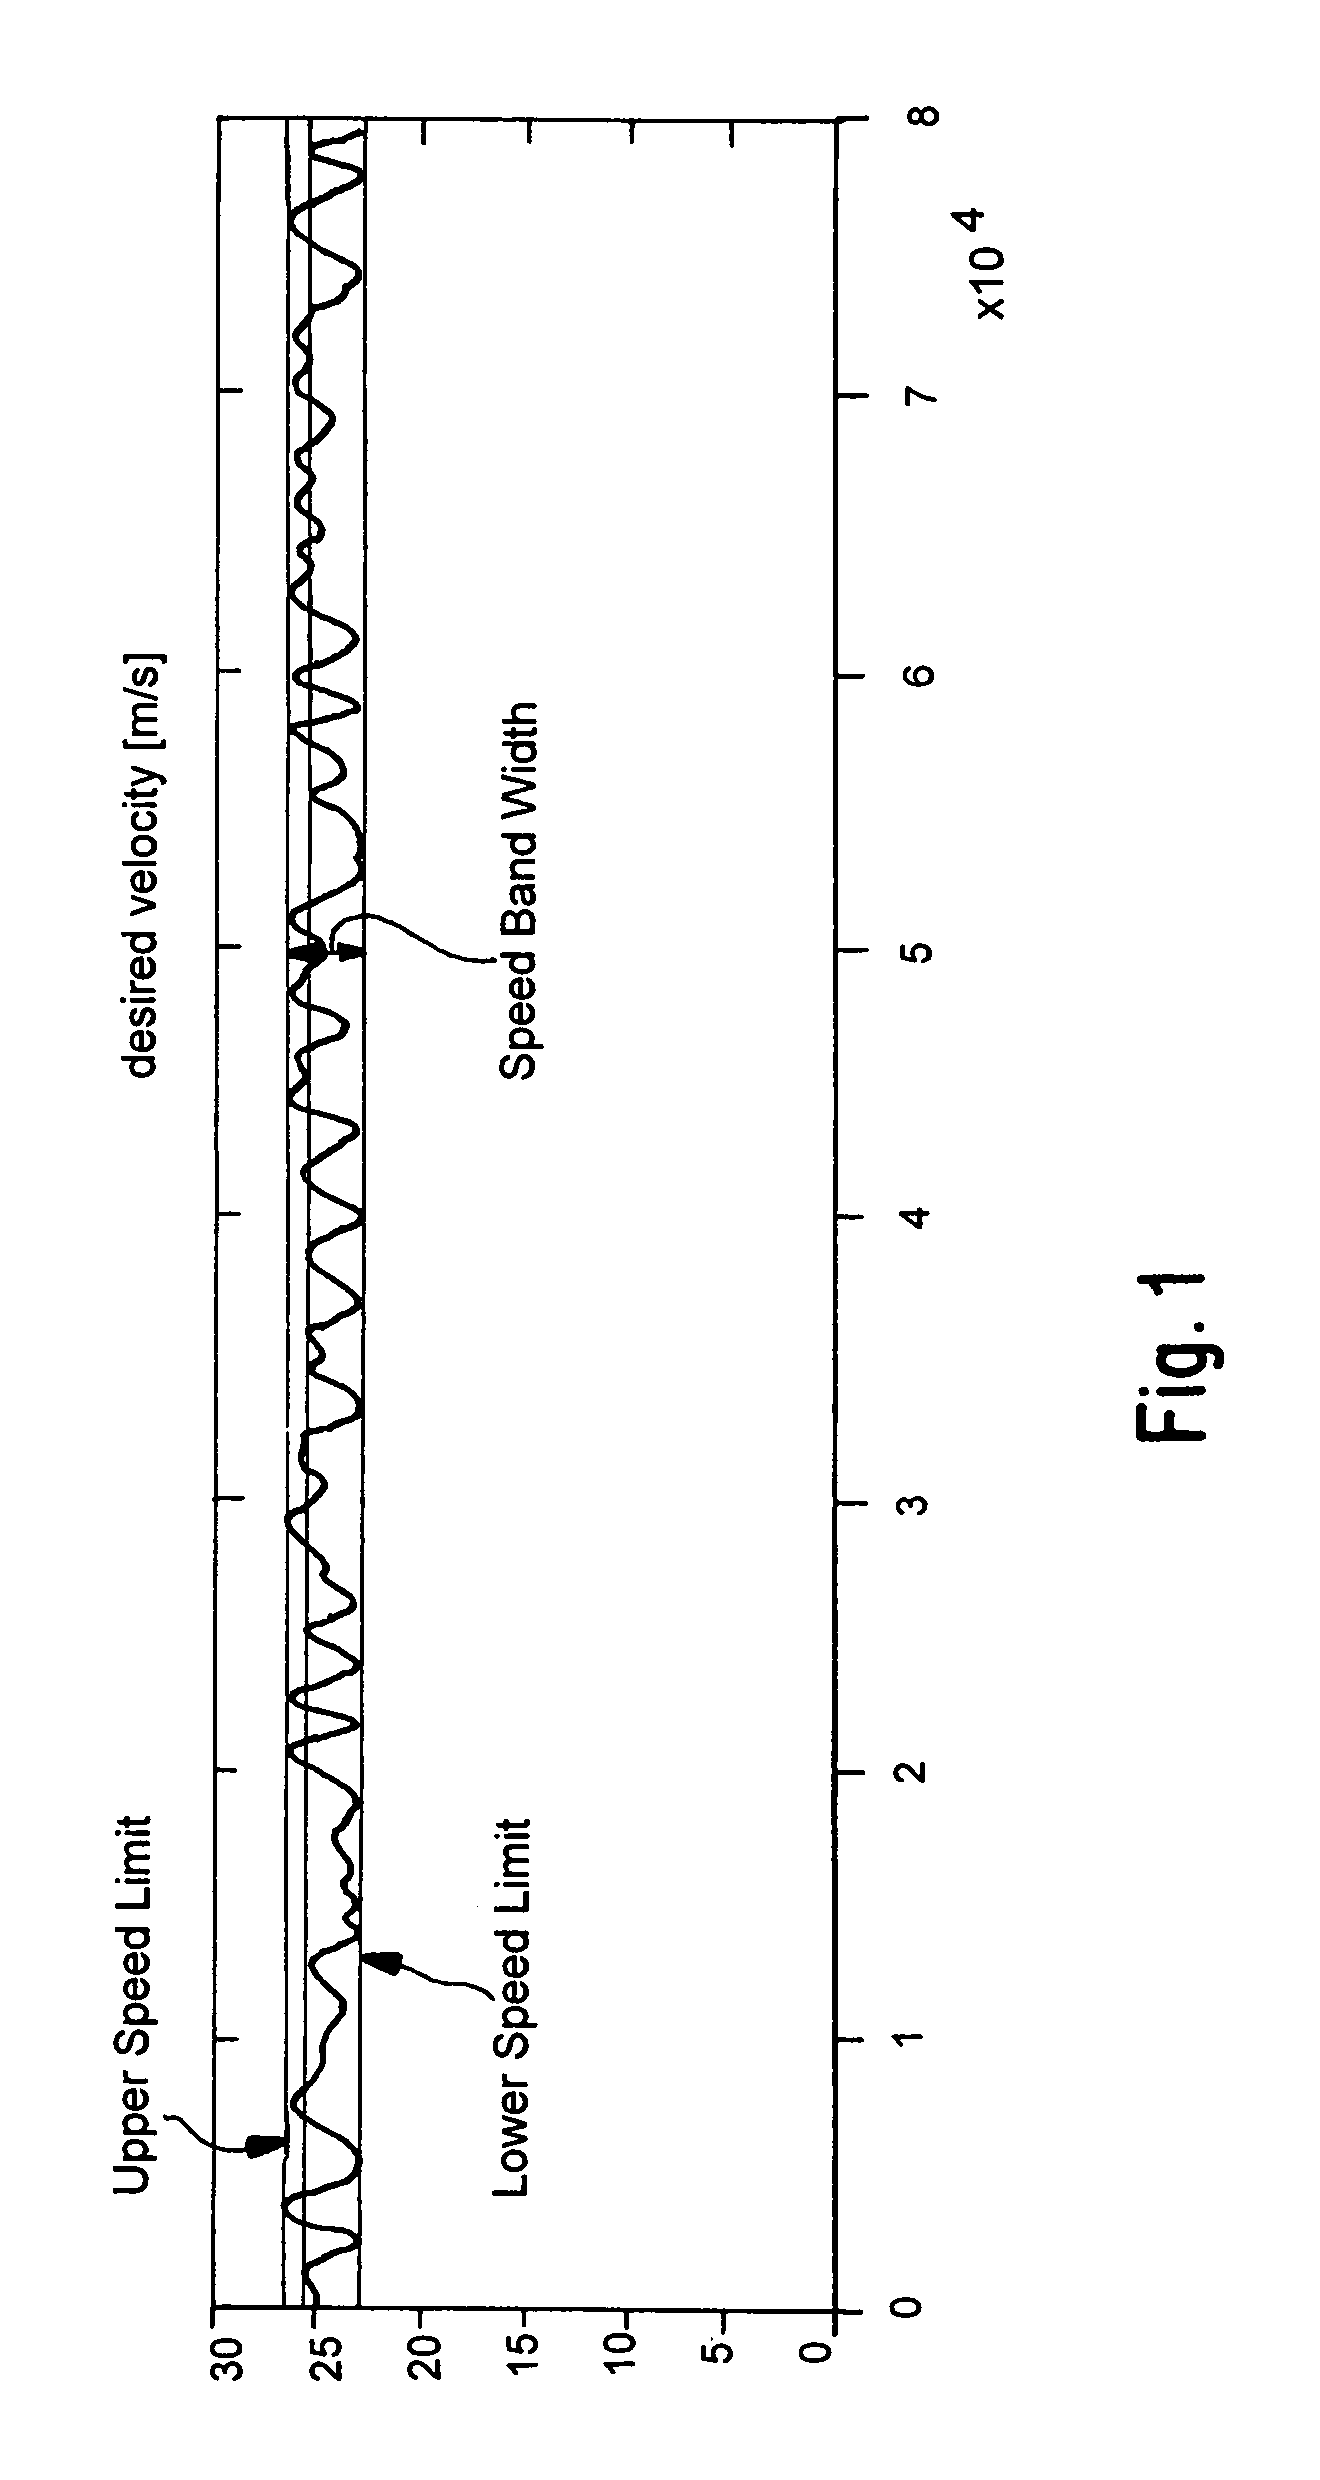 Predictive speed control for a motor vehicle